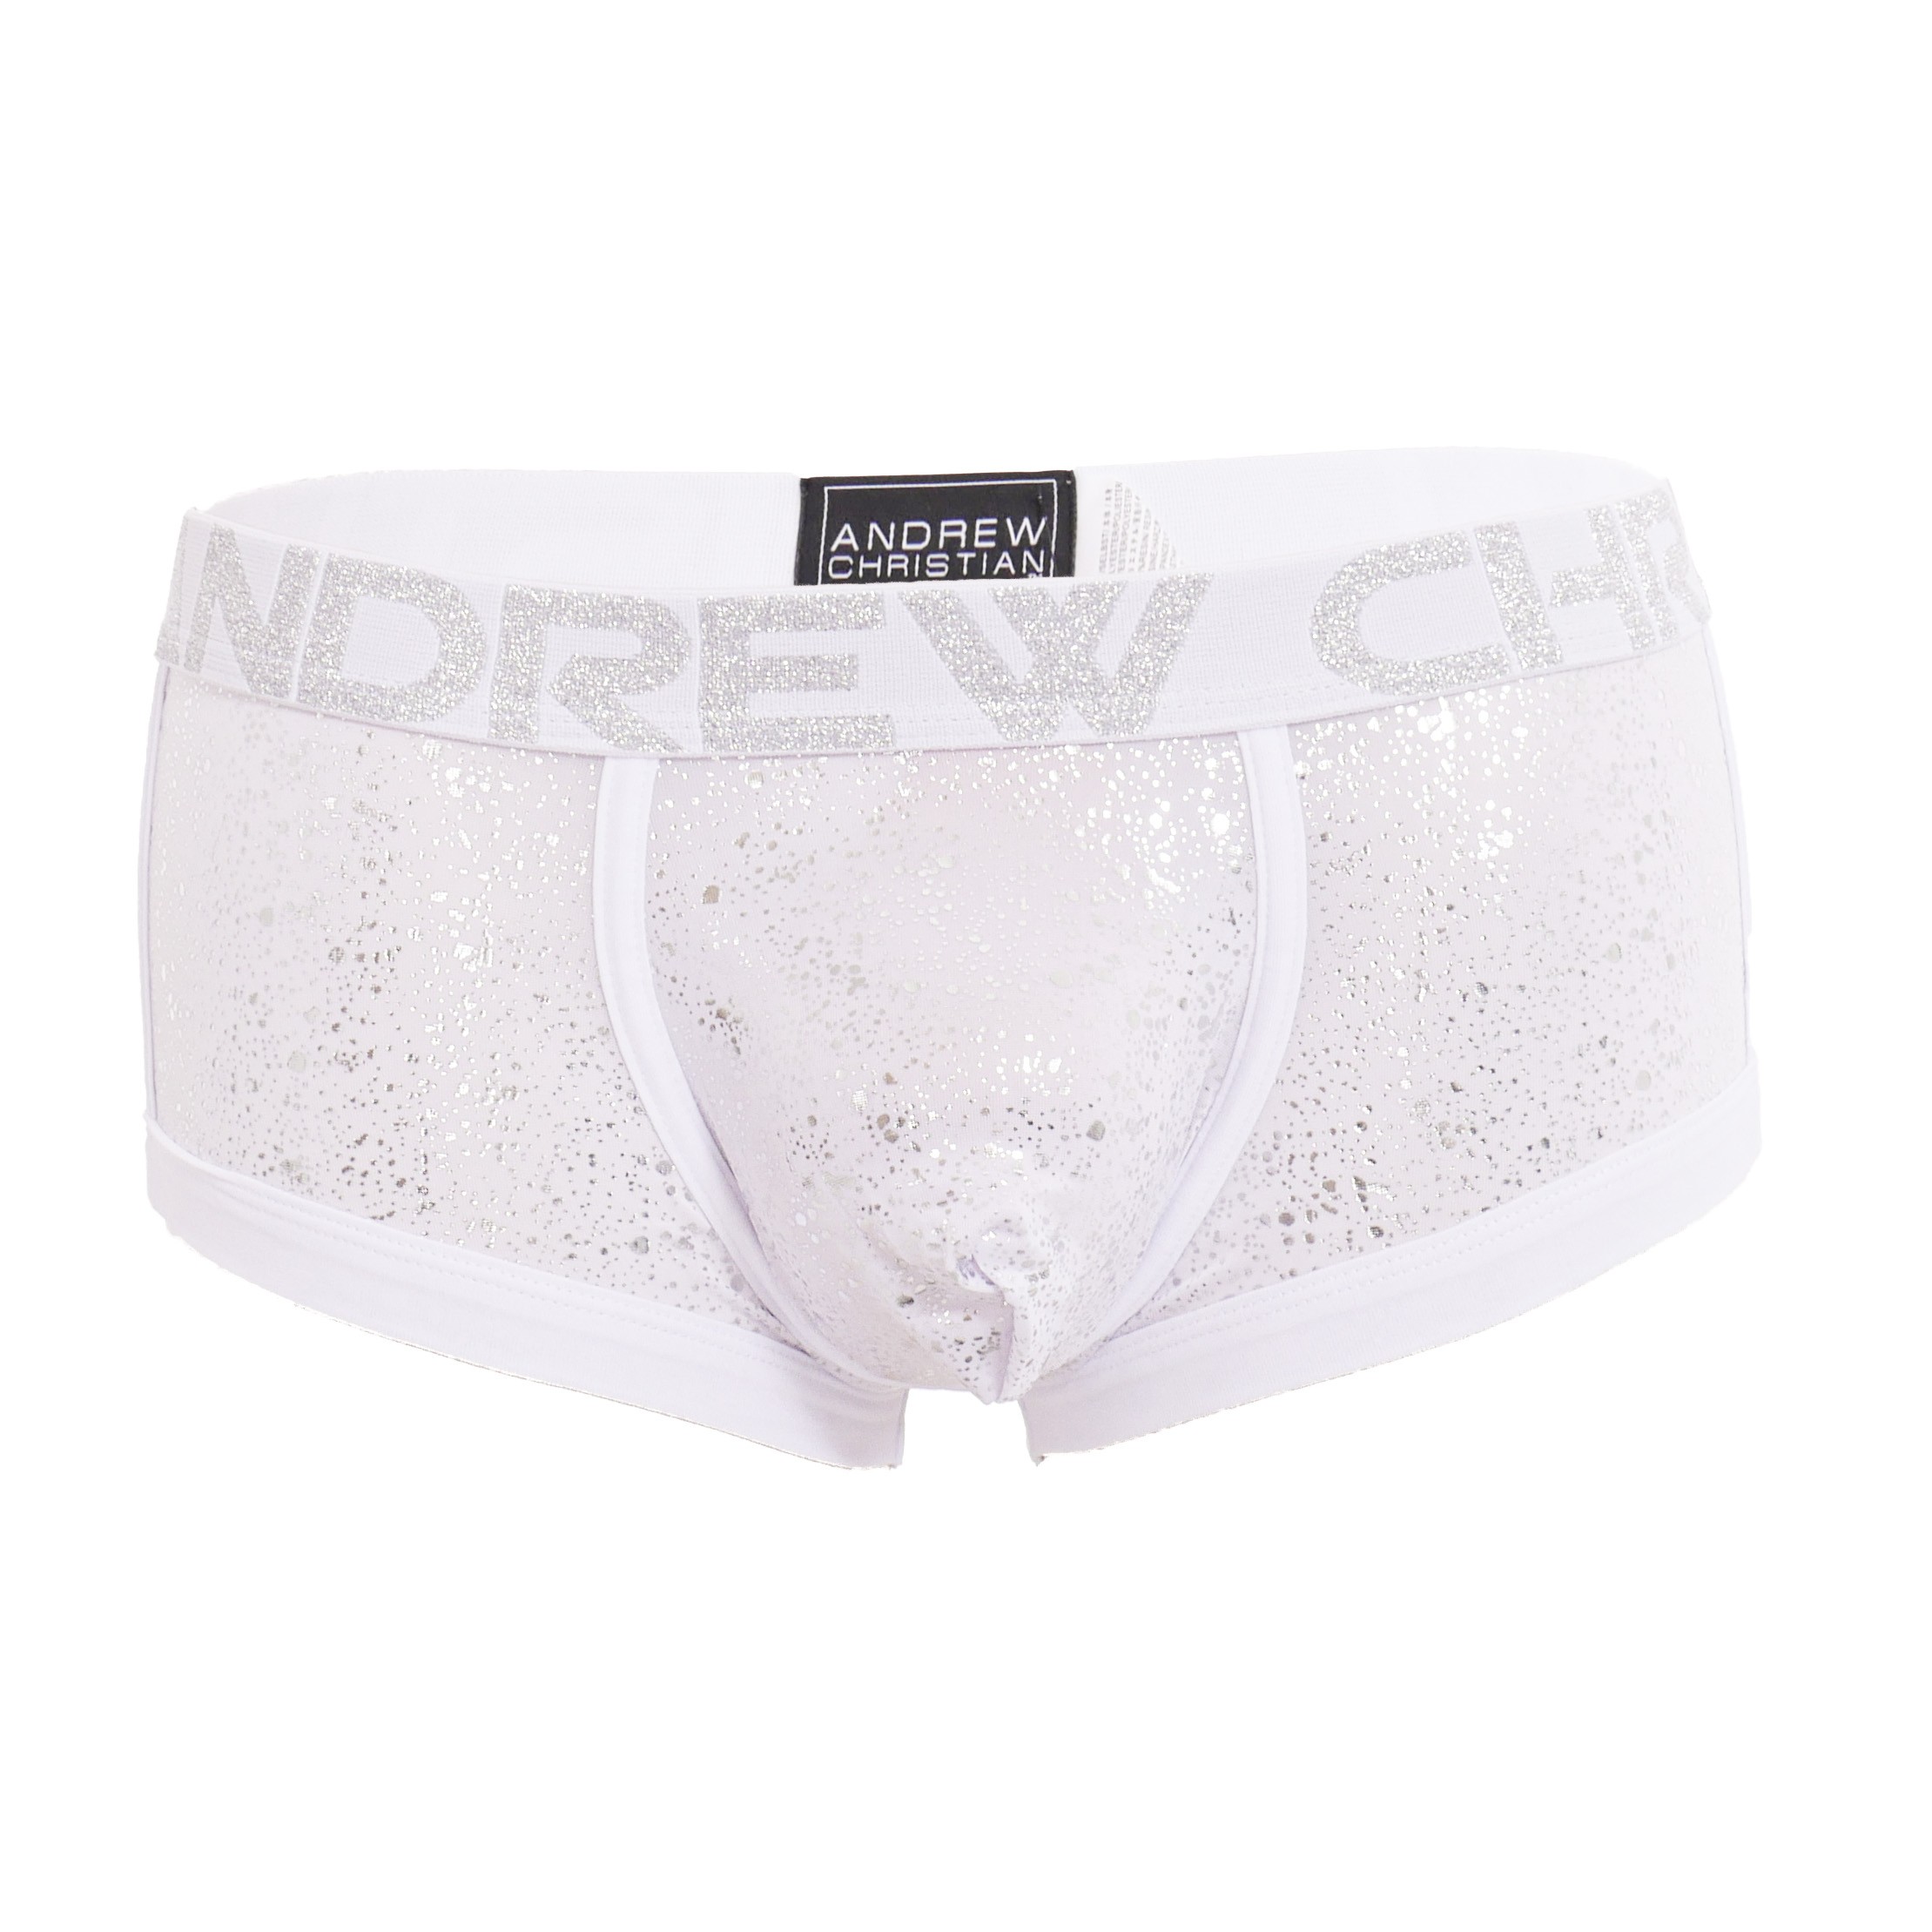 Boxer Snow Sheer brand w/ Almost for Boxers Andrew man Naked